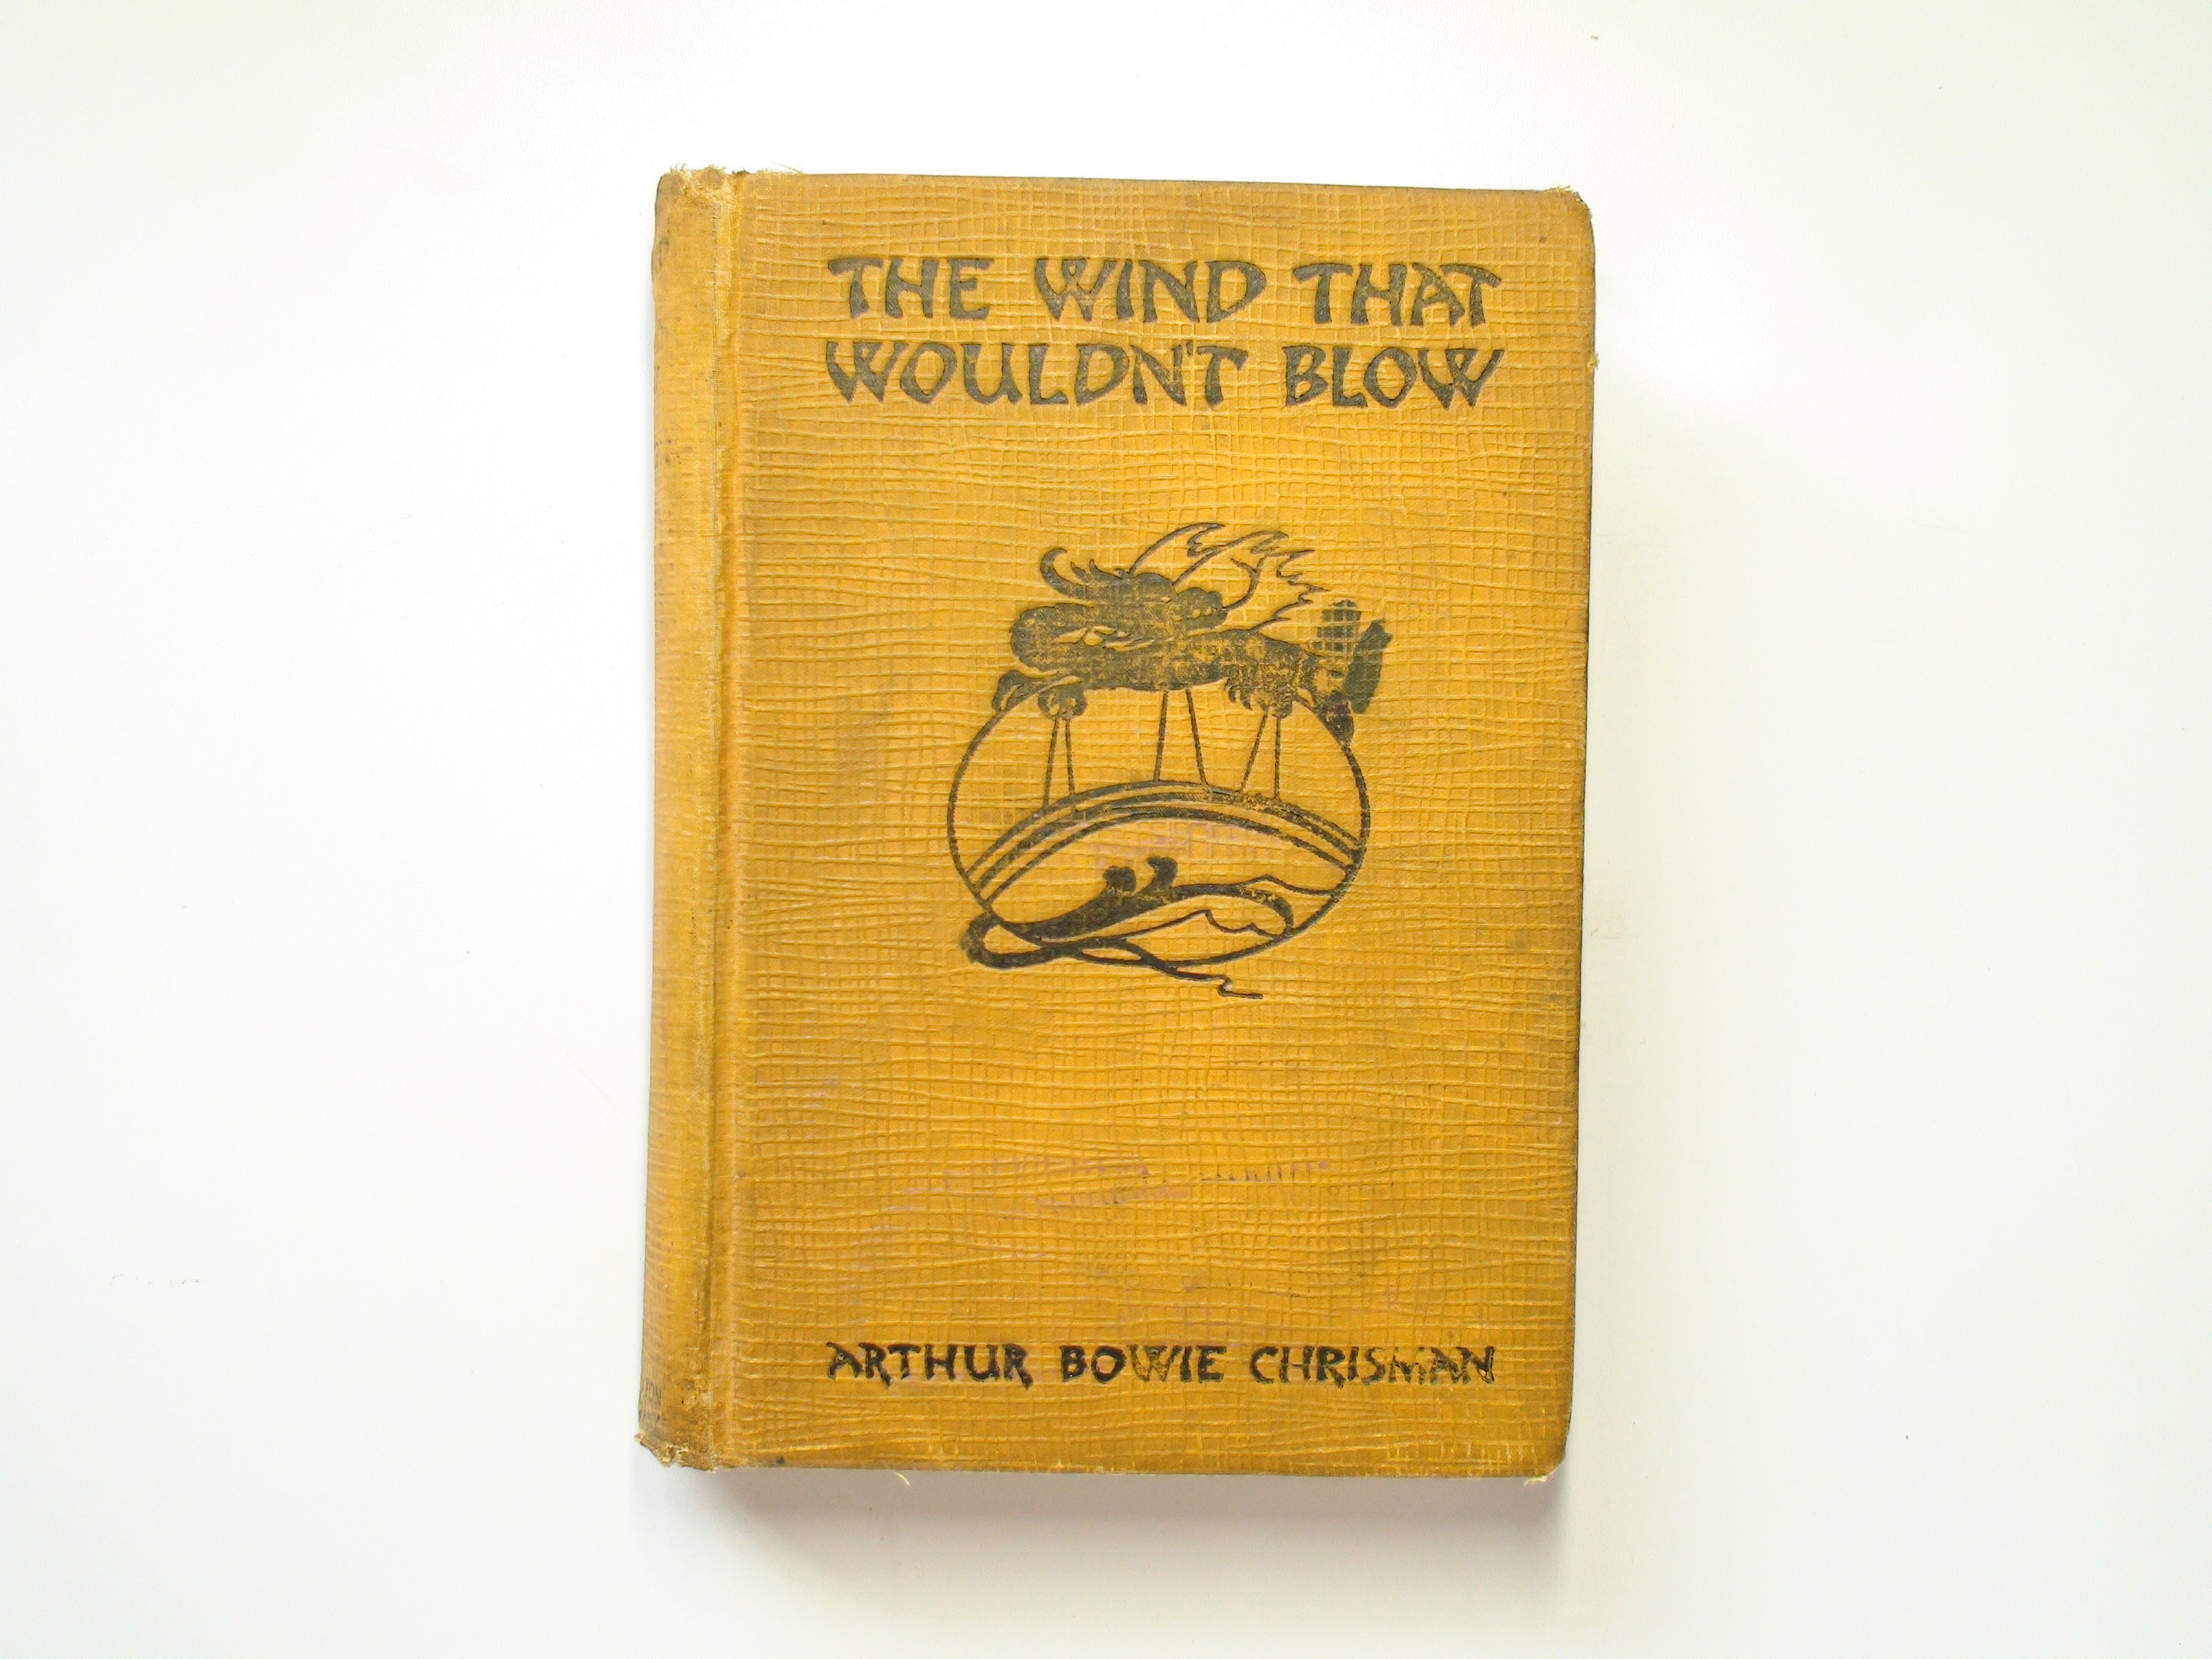 The Wind That Wouldn't Blow, by Arthur Bowie Chrisman, Illustrated, 1st Ed, 1927